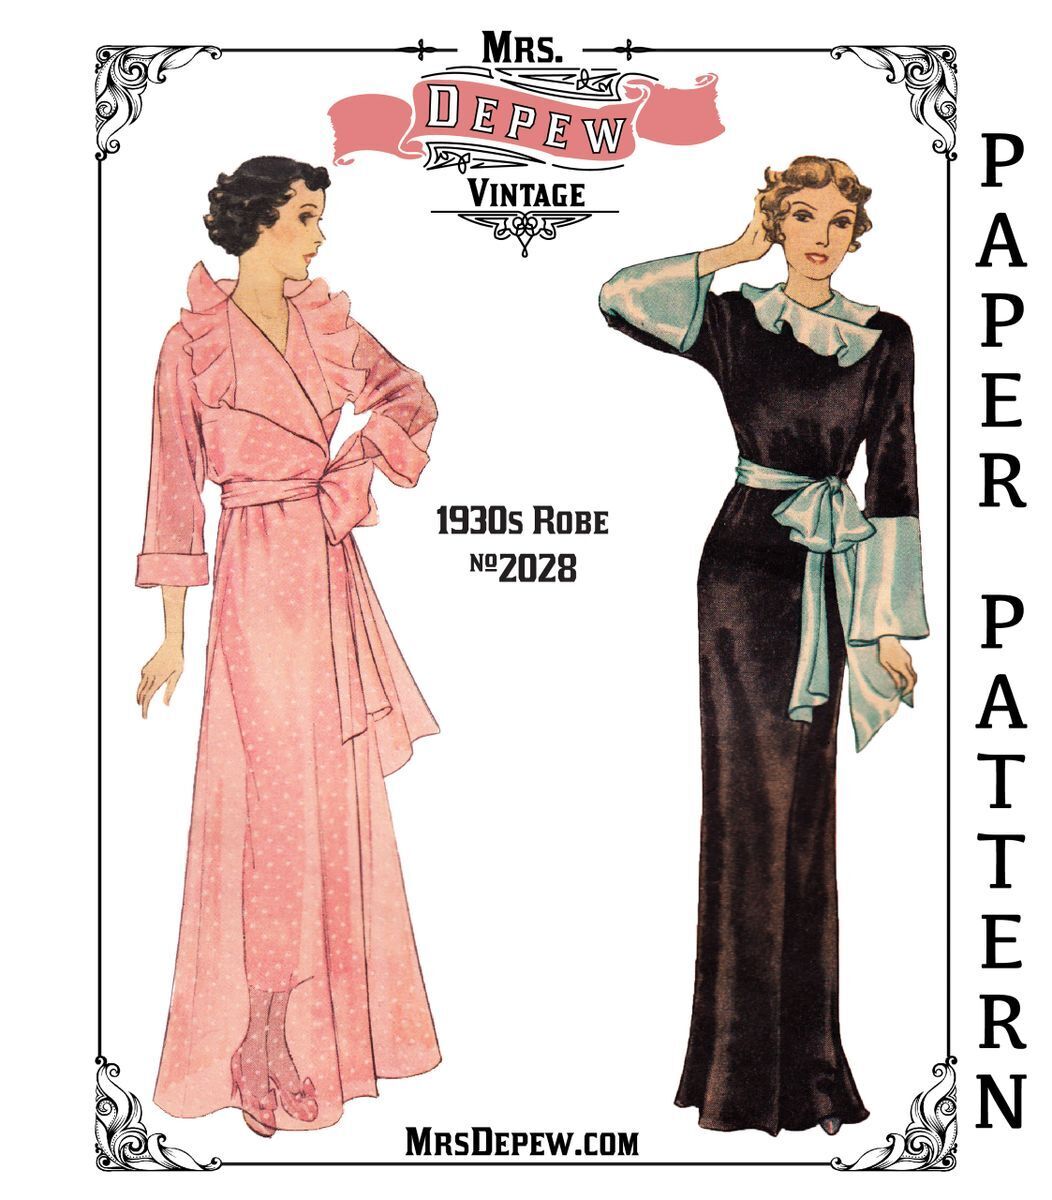 Vintage Sewing Pattern 1930s Full Length Robe, Ruffle Collar #2028  Reproduction